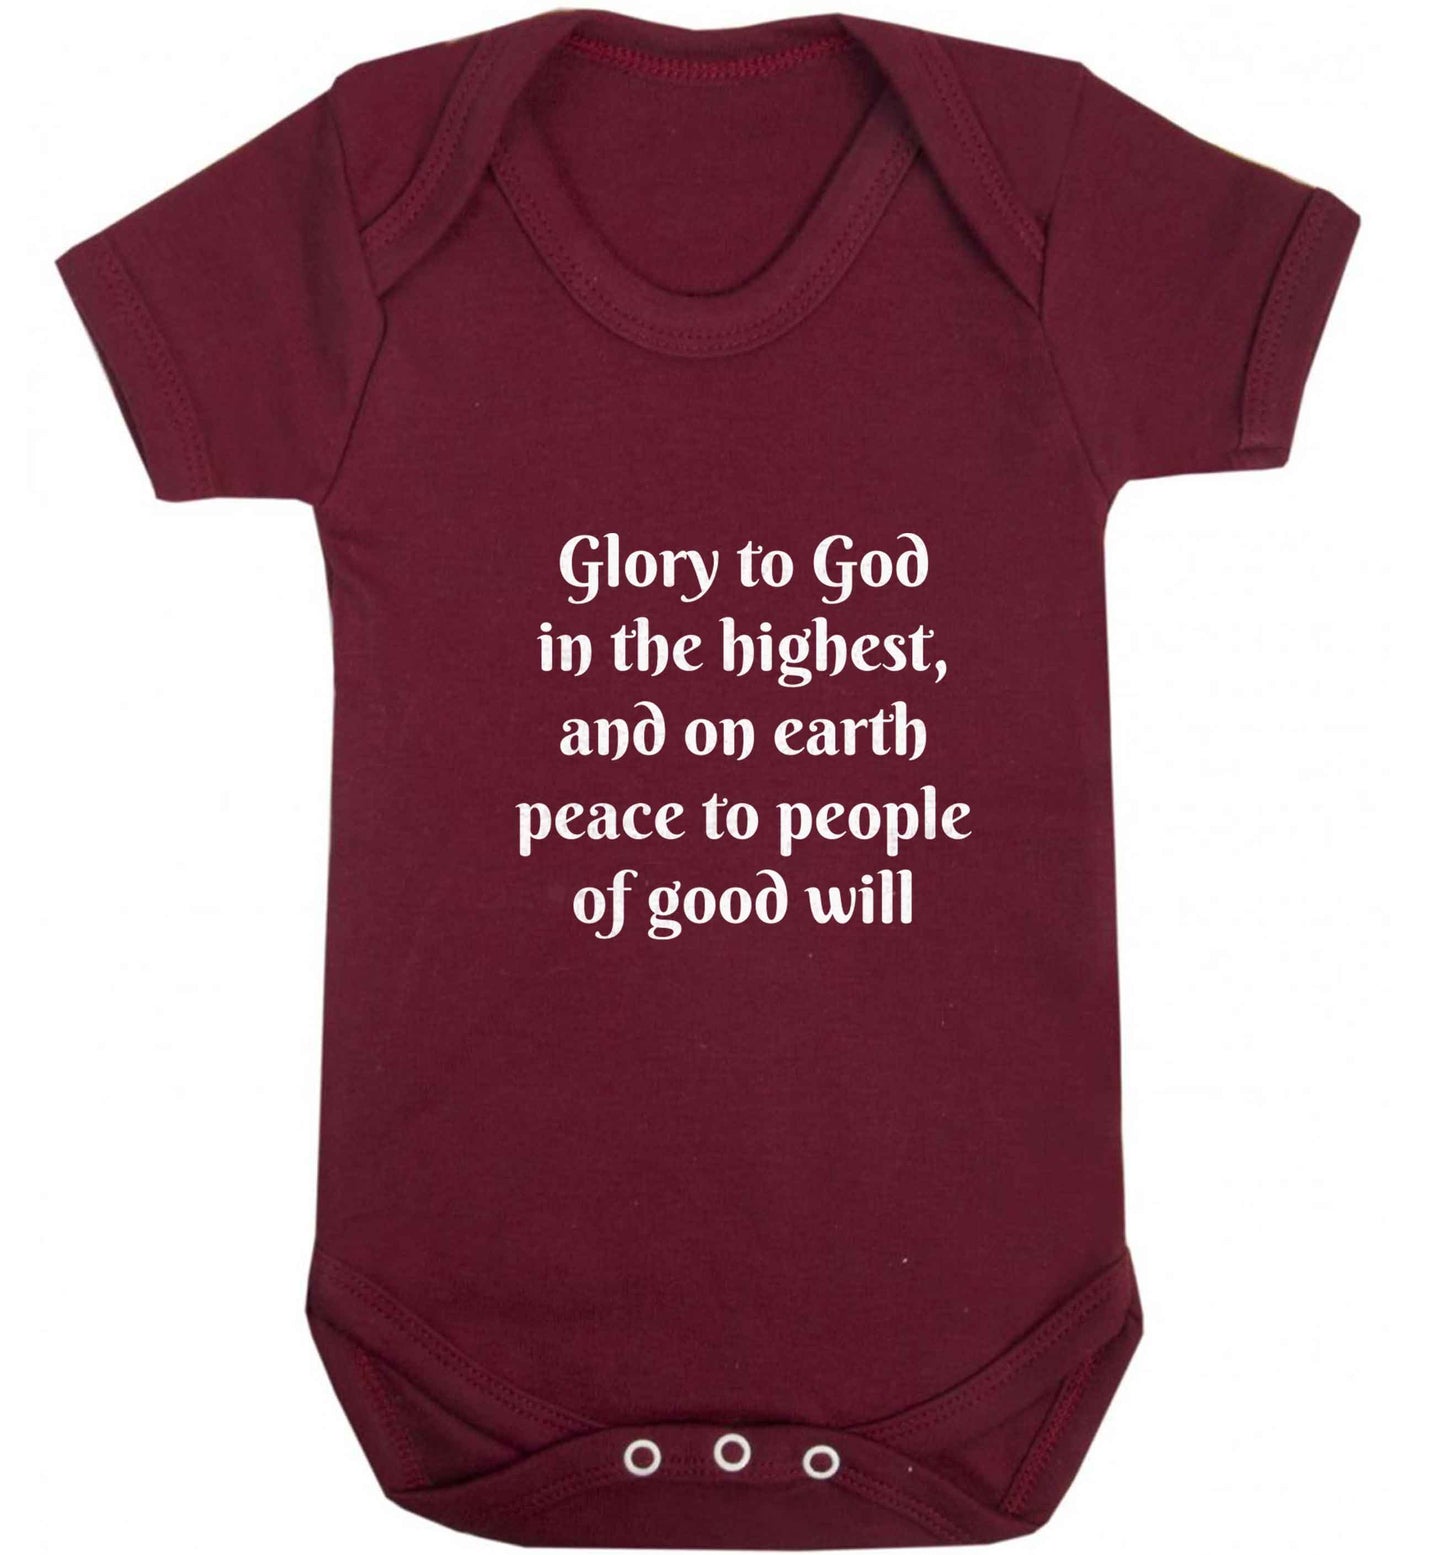 Glory to God in the highest, and on earth peace to people of good will baby vest maroon 18-24 months